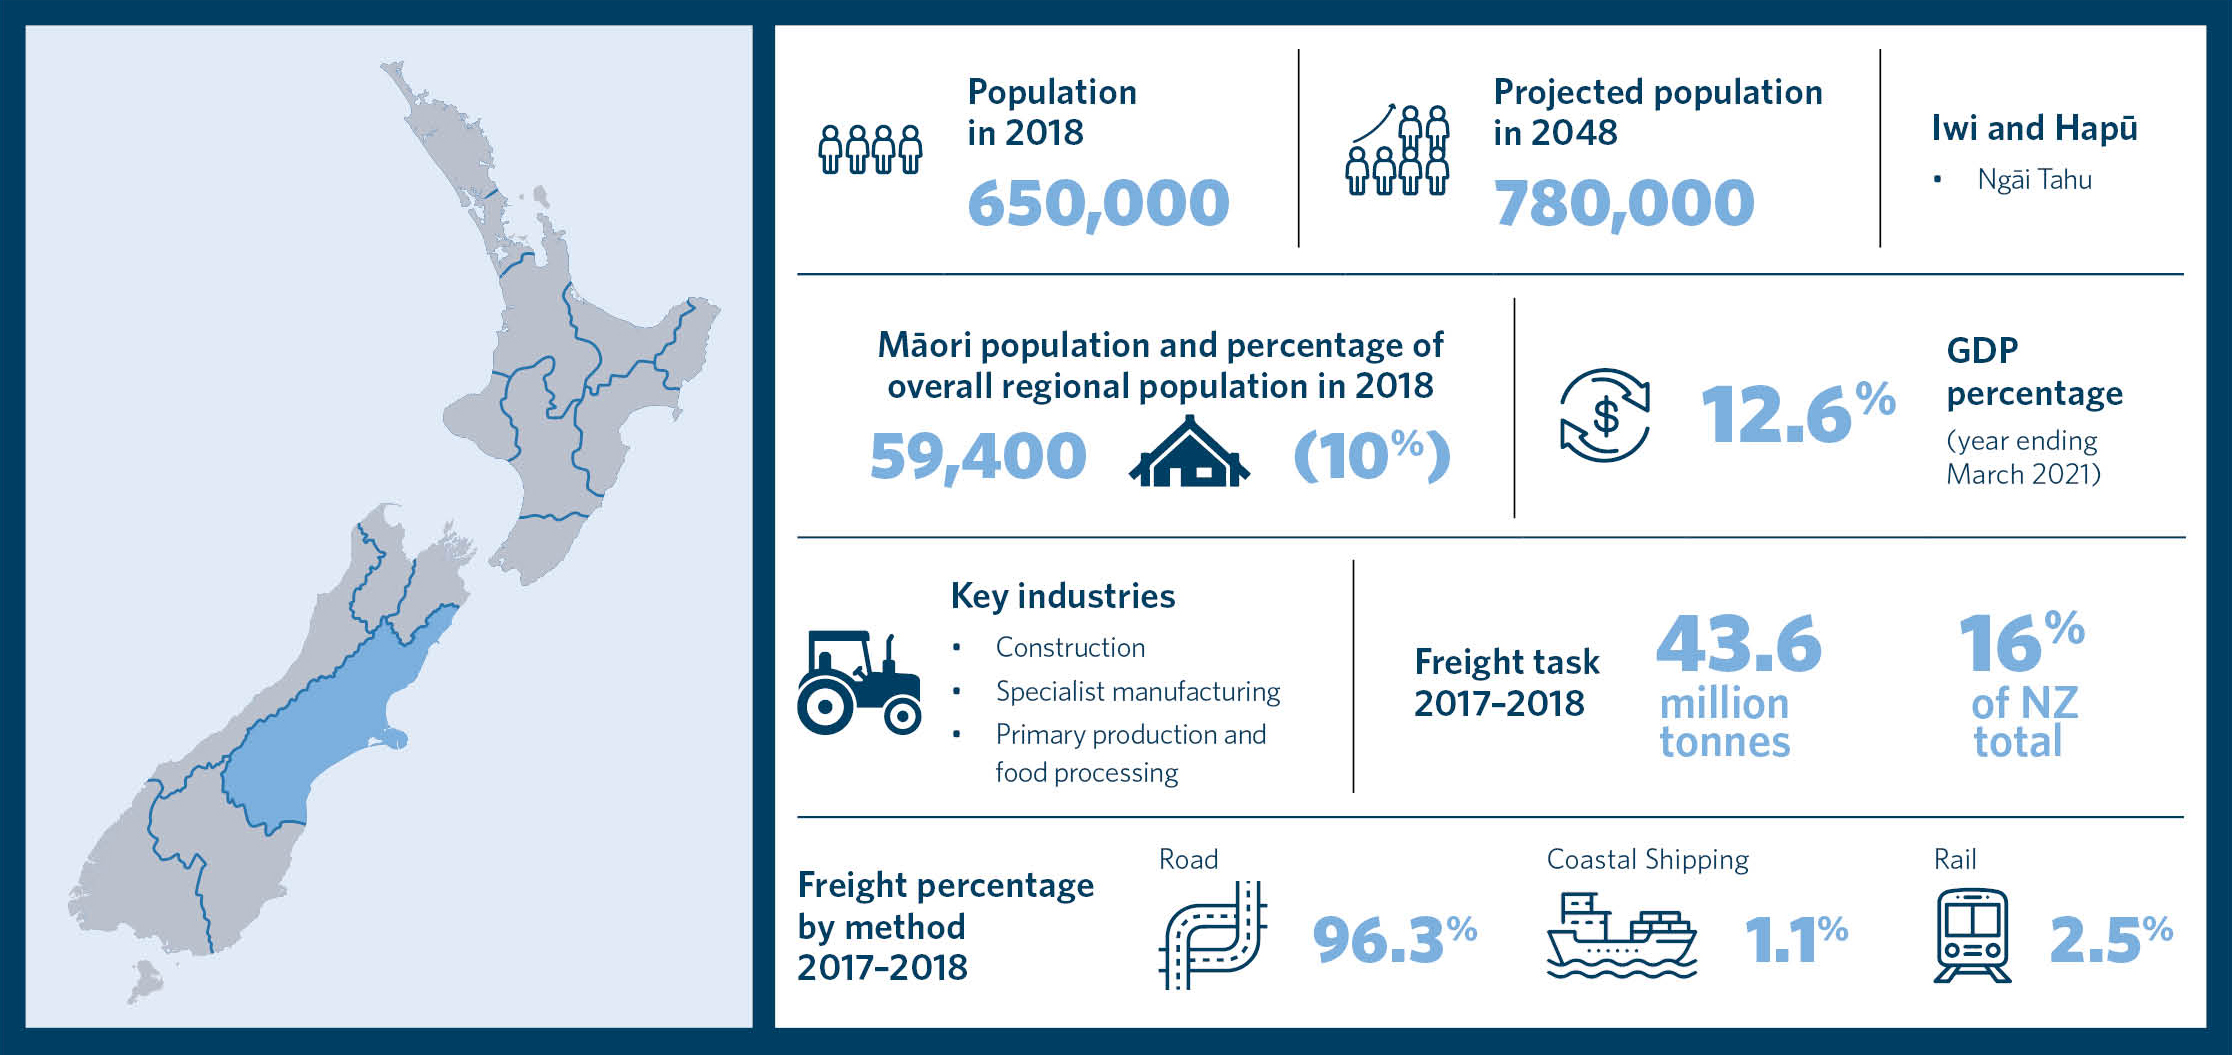 This is an infographic showing statistics for the region of Waitaha Canterbury. It includes information about the population in 2018, projected population in 2048, Māori population and percentage of overall regional population in 2018, a list of iwi and h